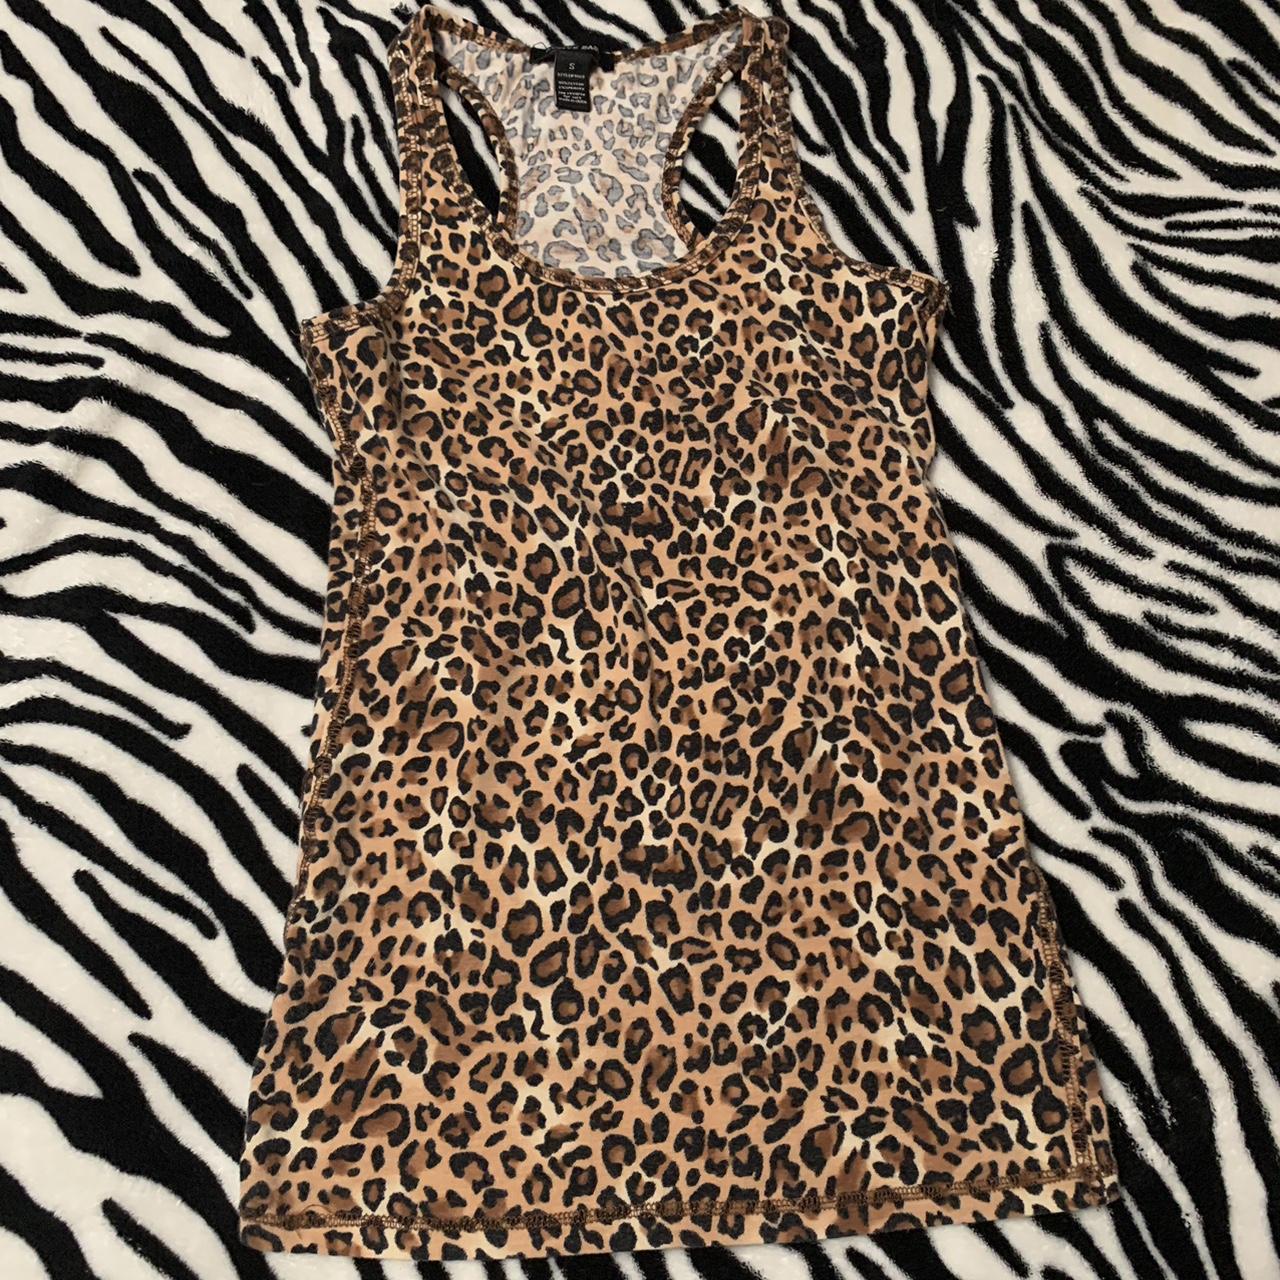 Active Basic Leopard Print Tank Top Size Small Using... - Depop